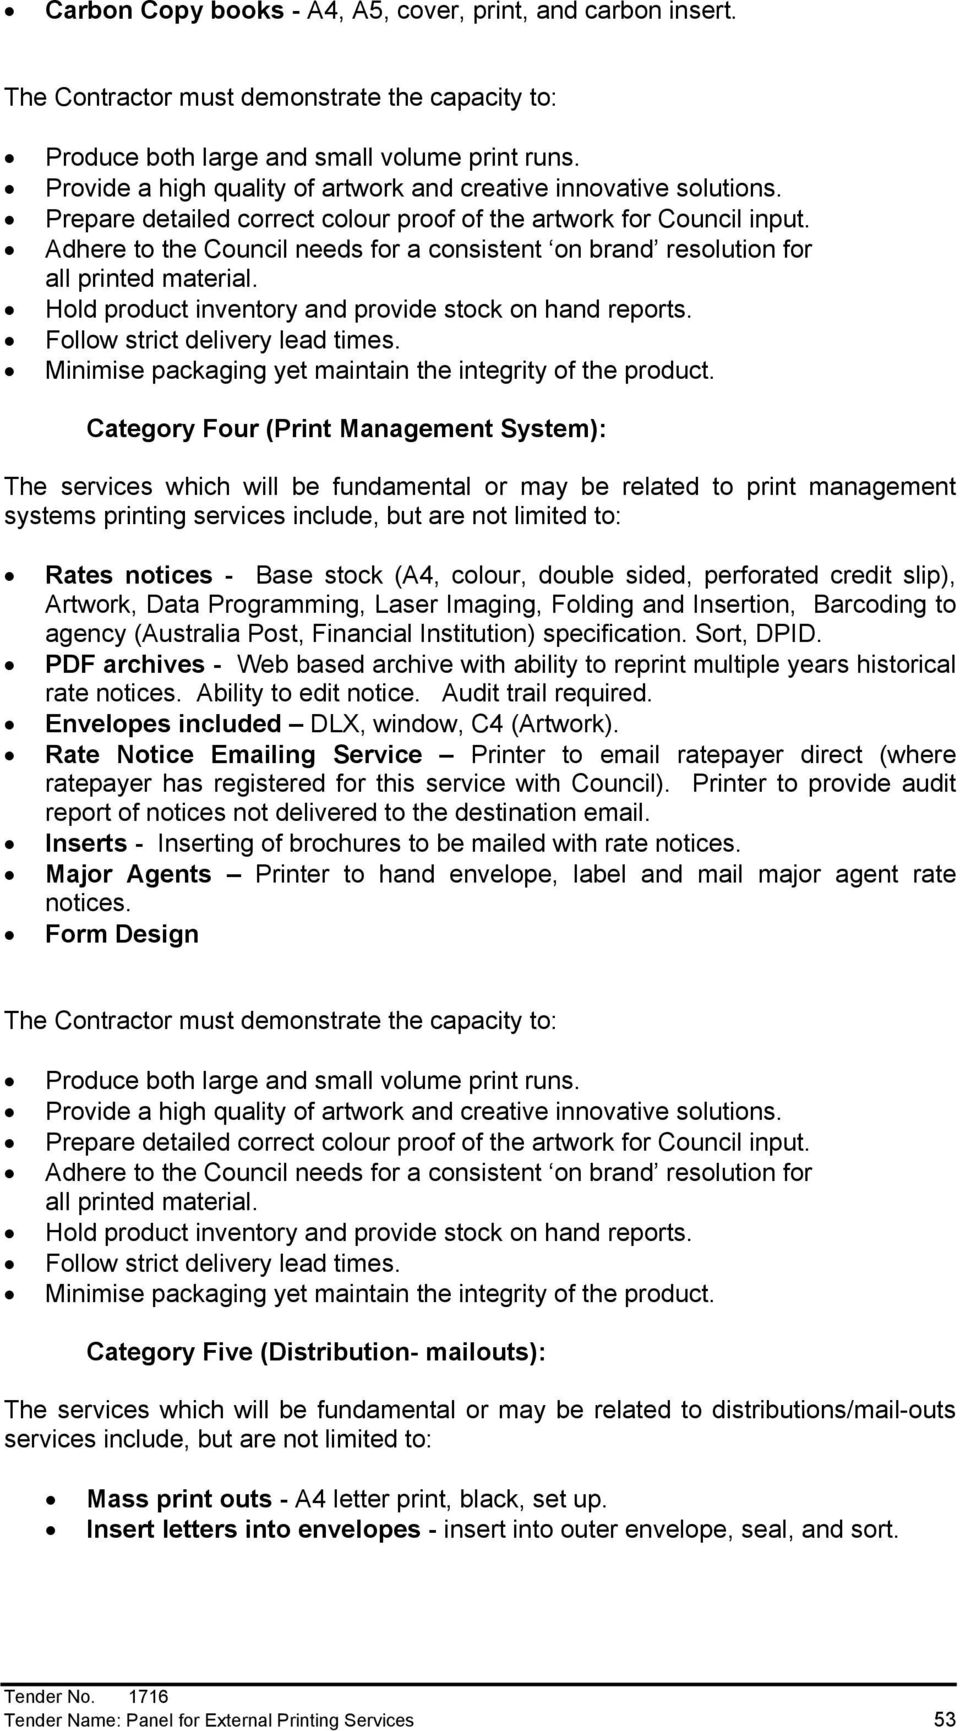 Category Four (Print Management System): The services which will be fundamental or may be related to print management systems printing services include, but are not limited to: Rates notices - Base